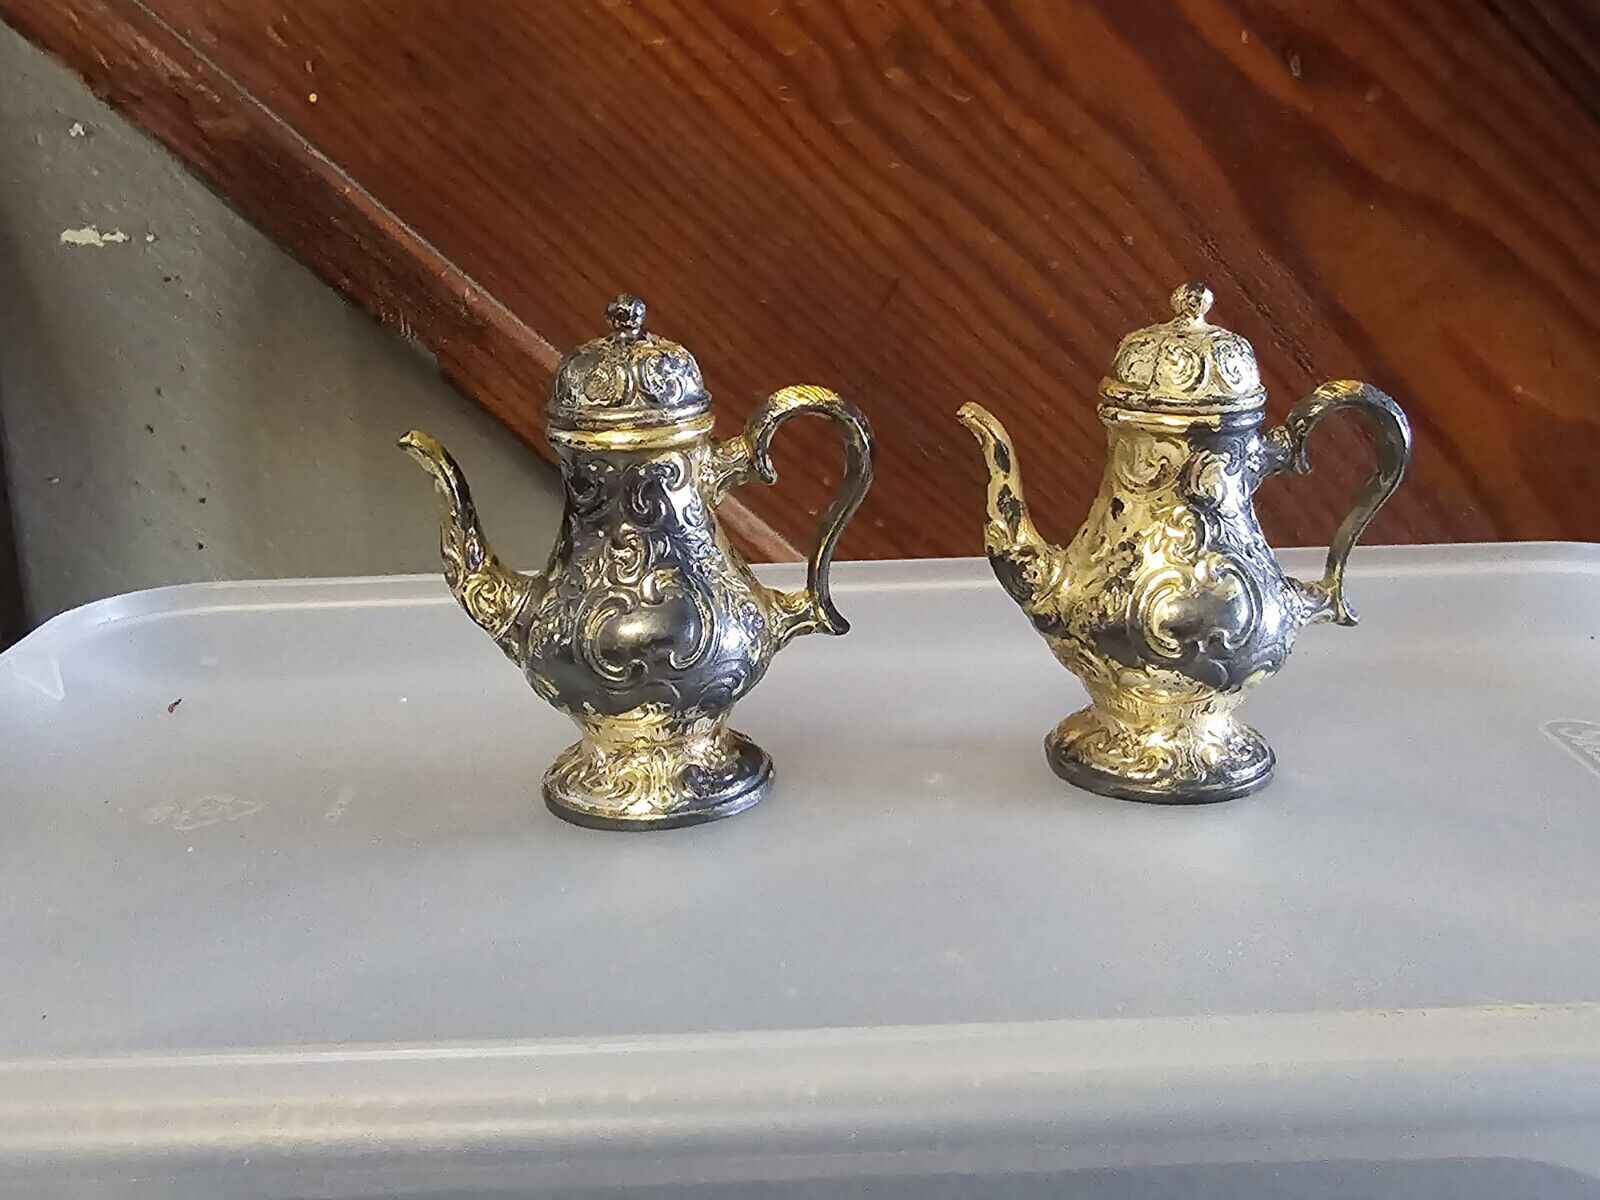 Vintage Silver Plated Copper Teapot  Salt & Pepper Shakers Victorian Looking